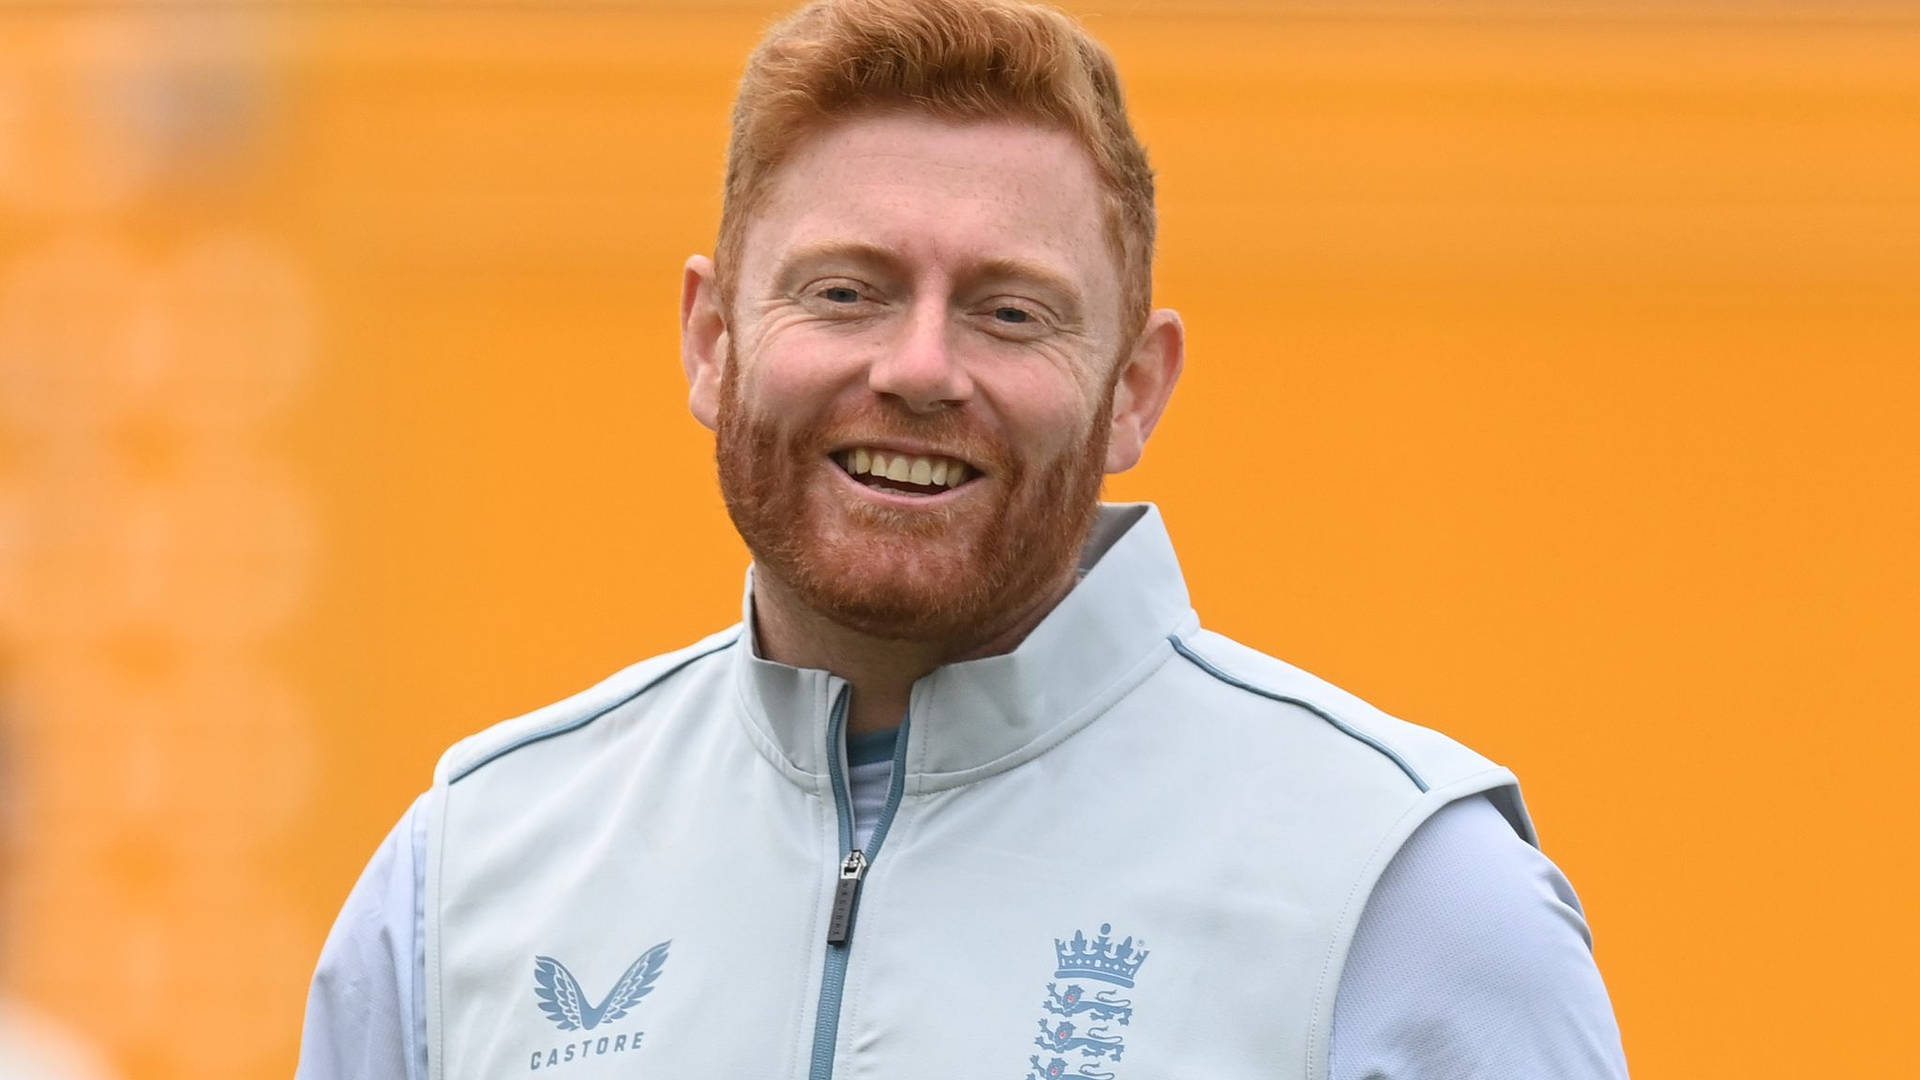 Engaging smile of Jonny Bairstow, the cricket whiz Wallpaper